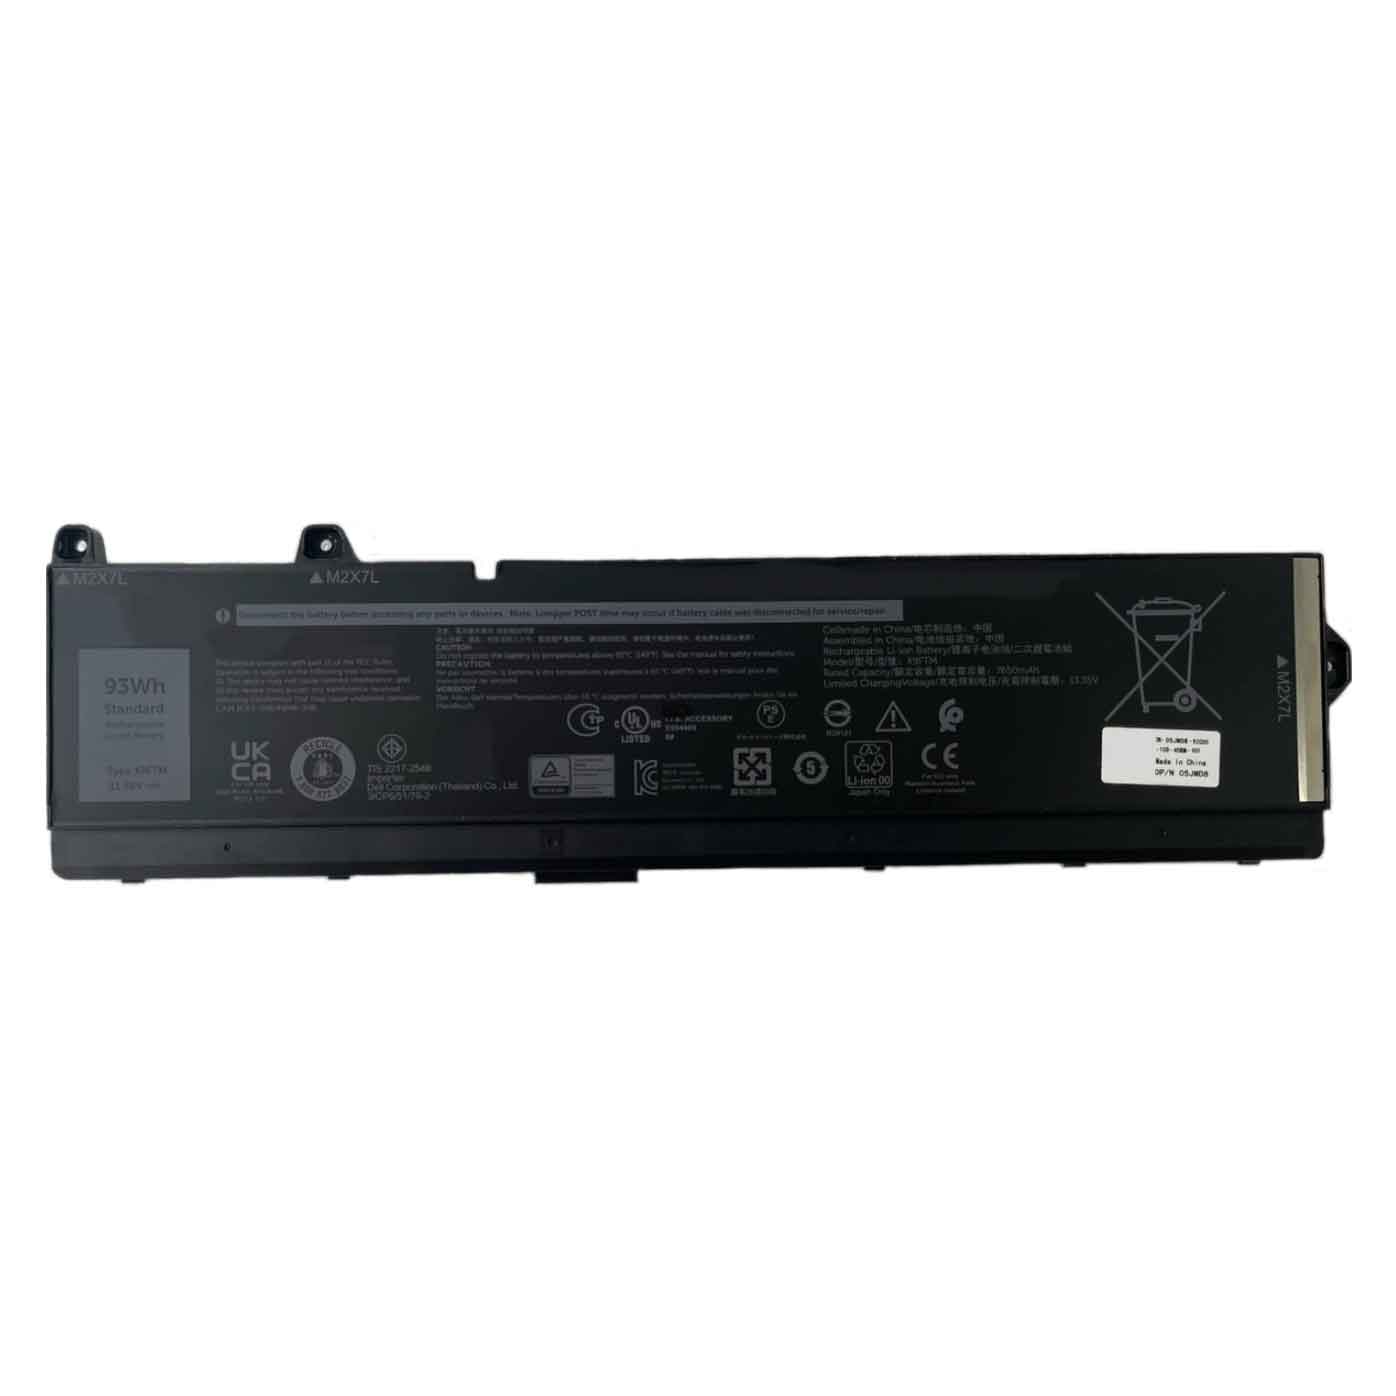 Replacement for Dell X9FTM battery